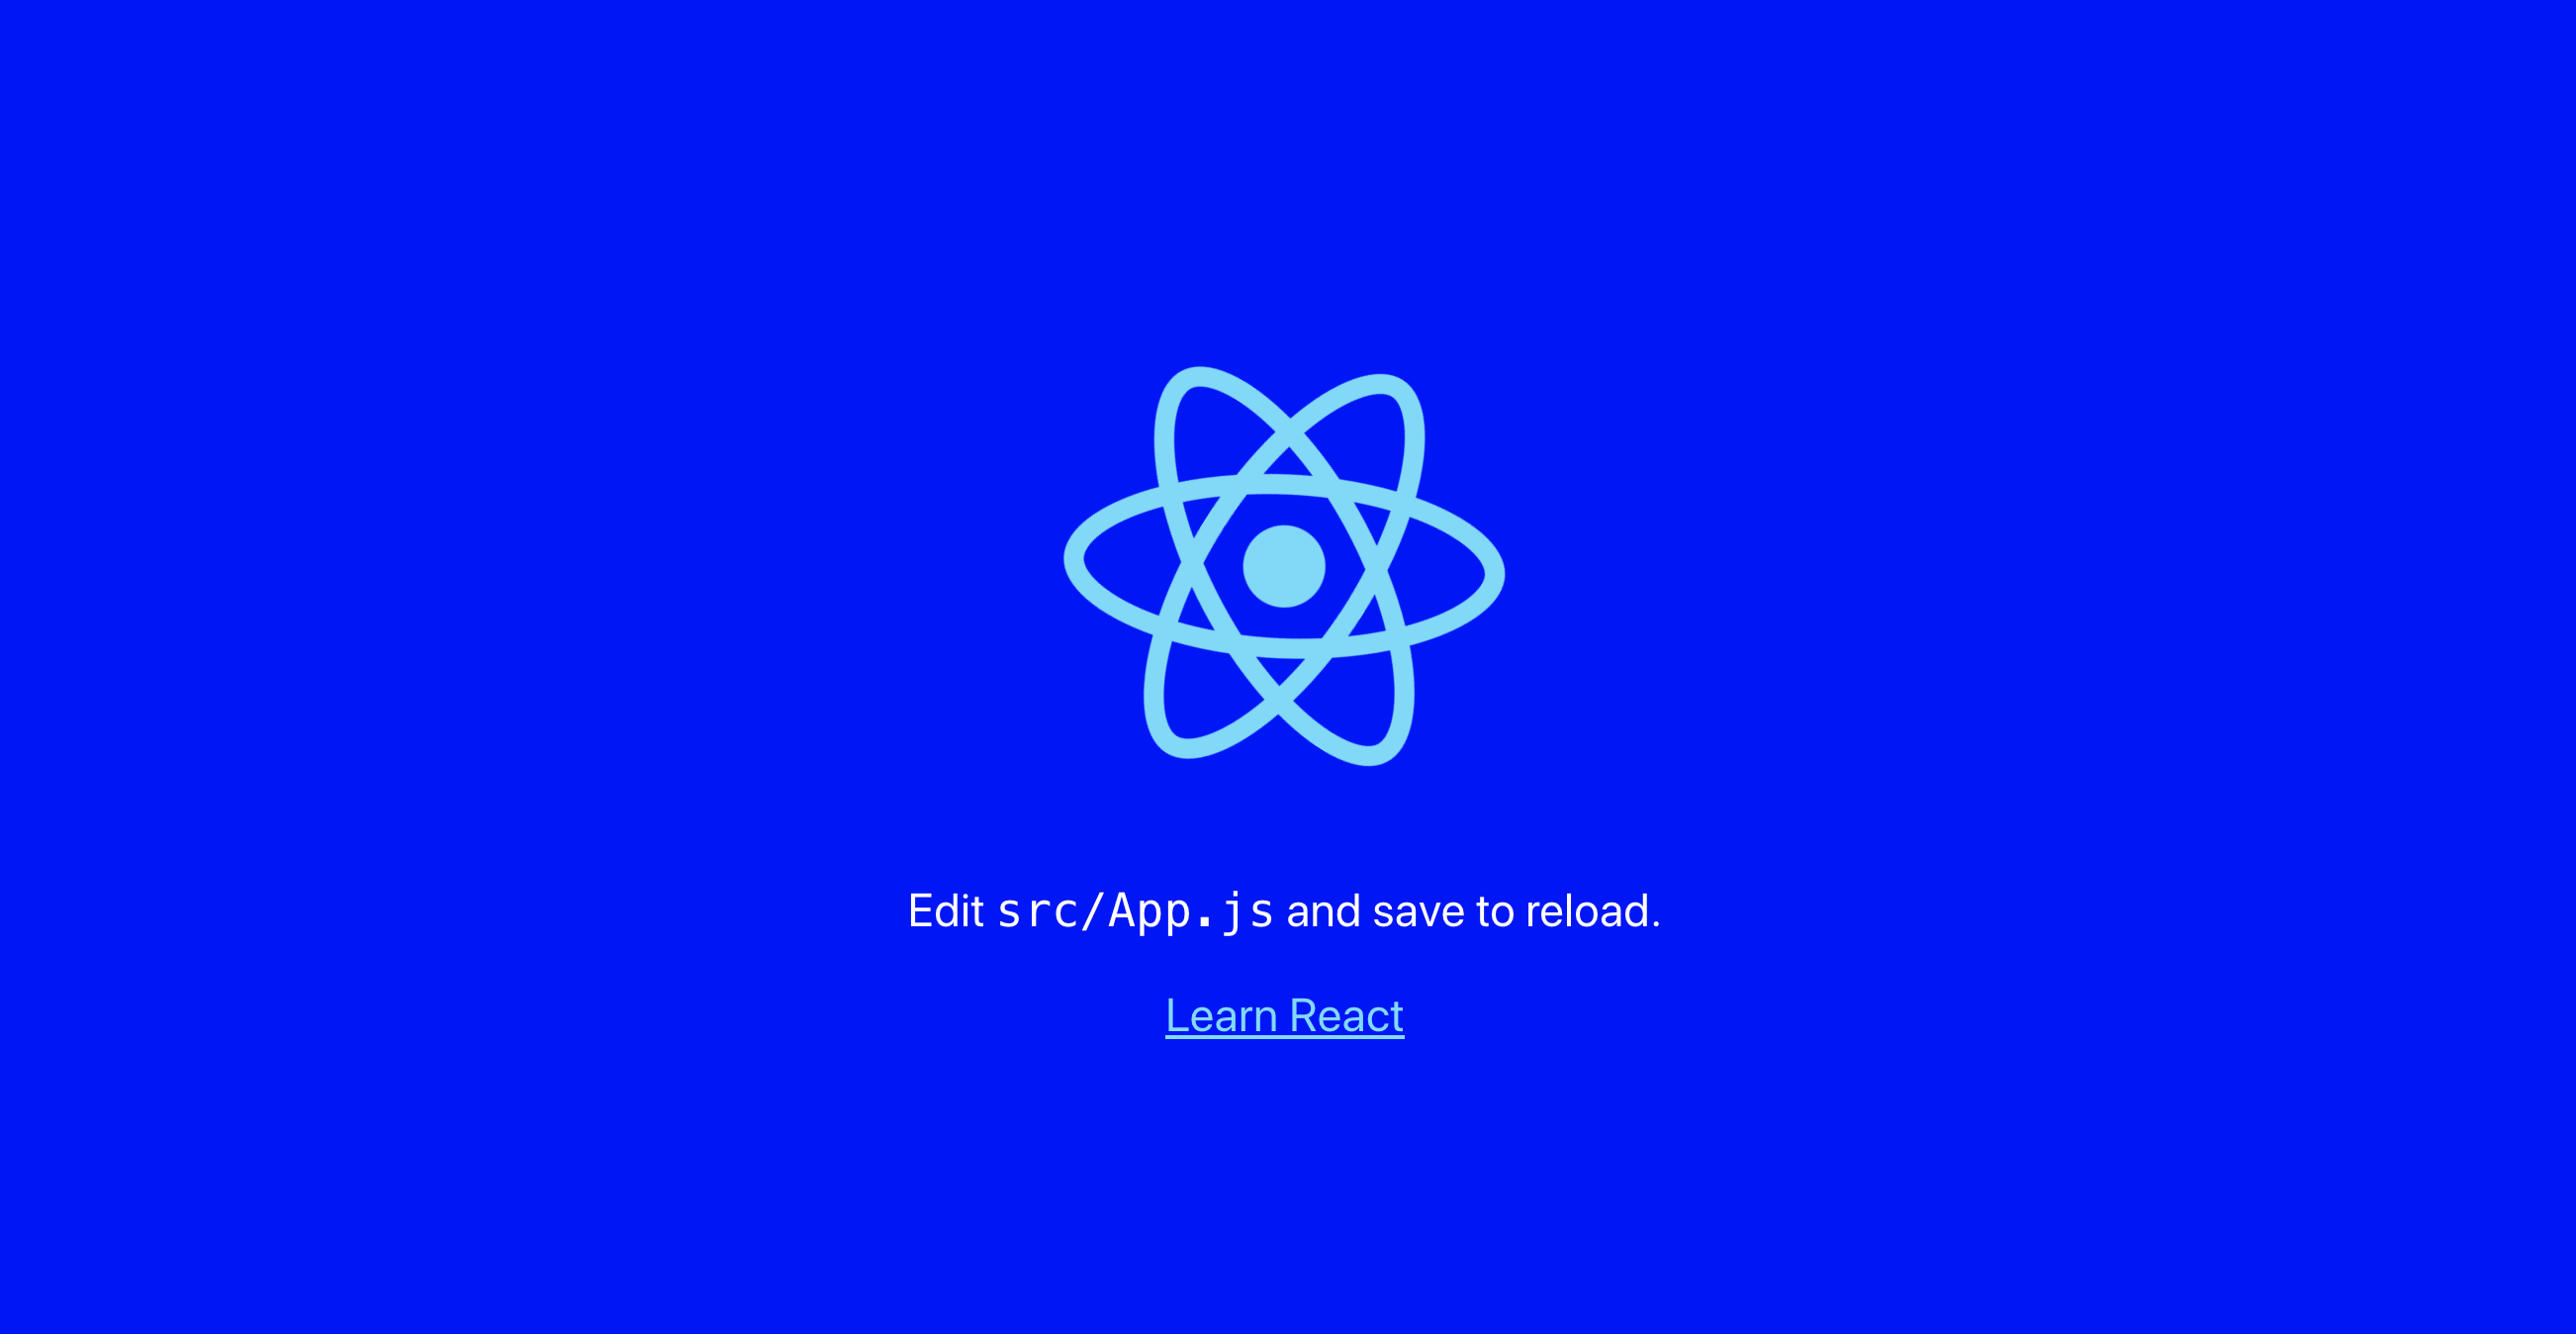 React app with blue background